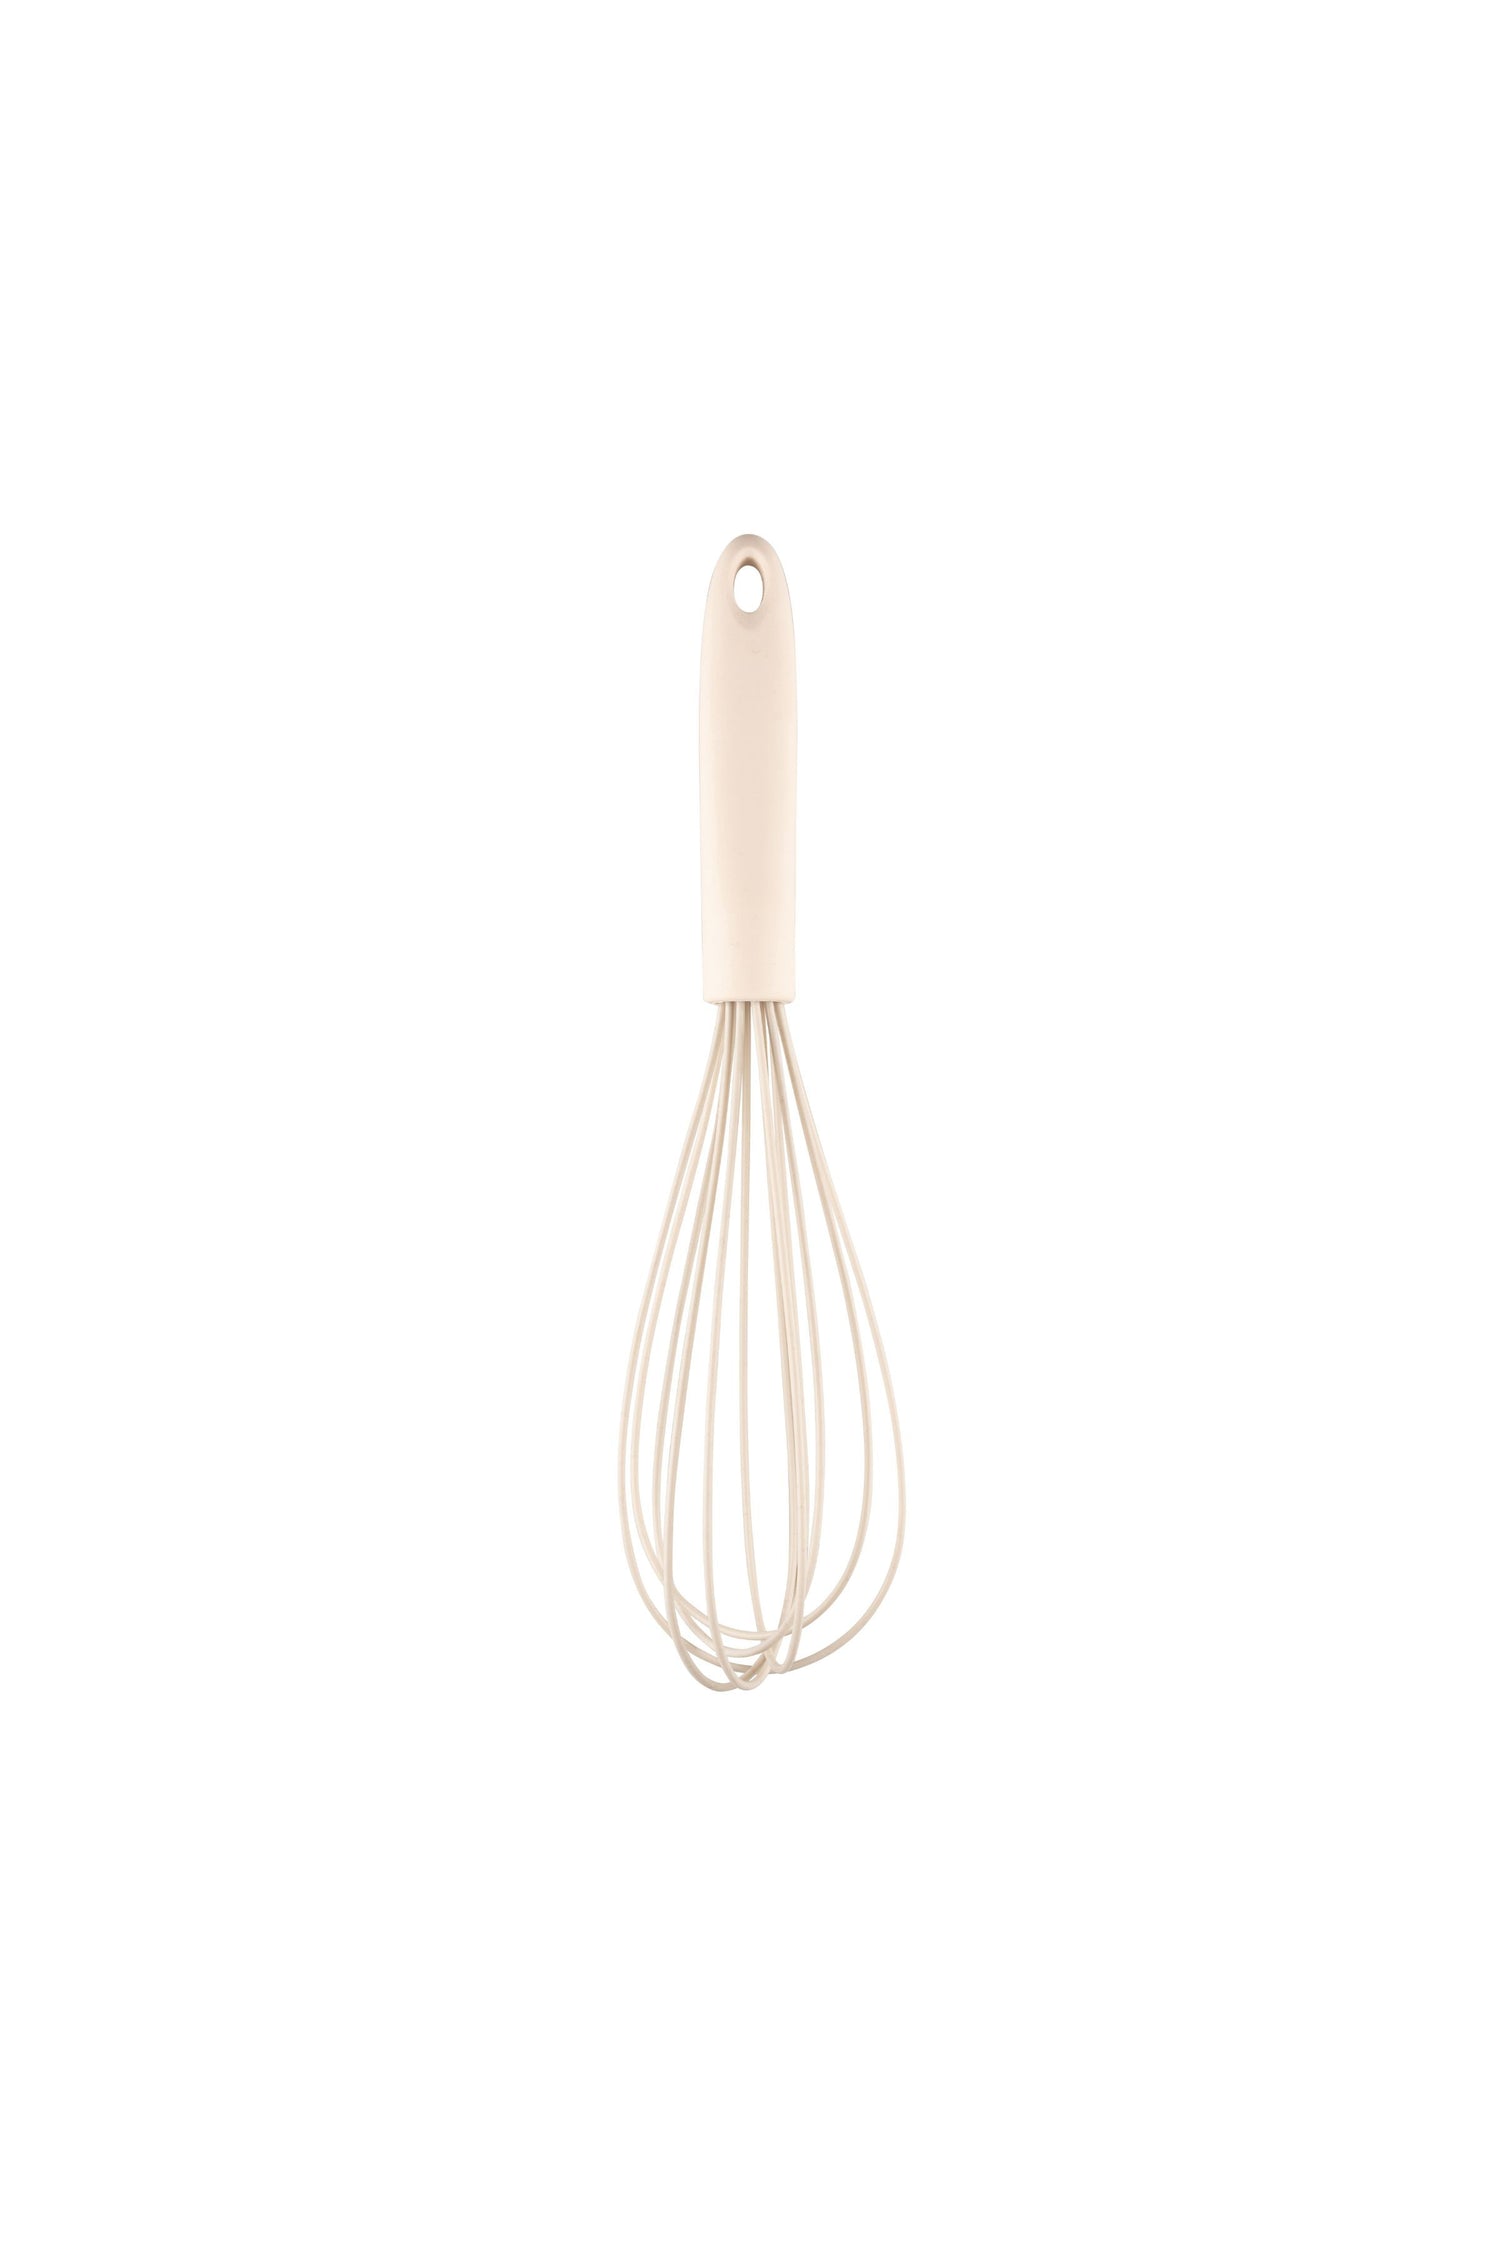 BALL WHISK, SILICONE 28 cm, Royal Pearl